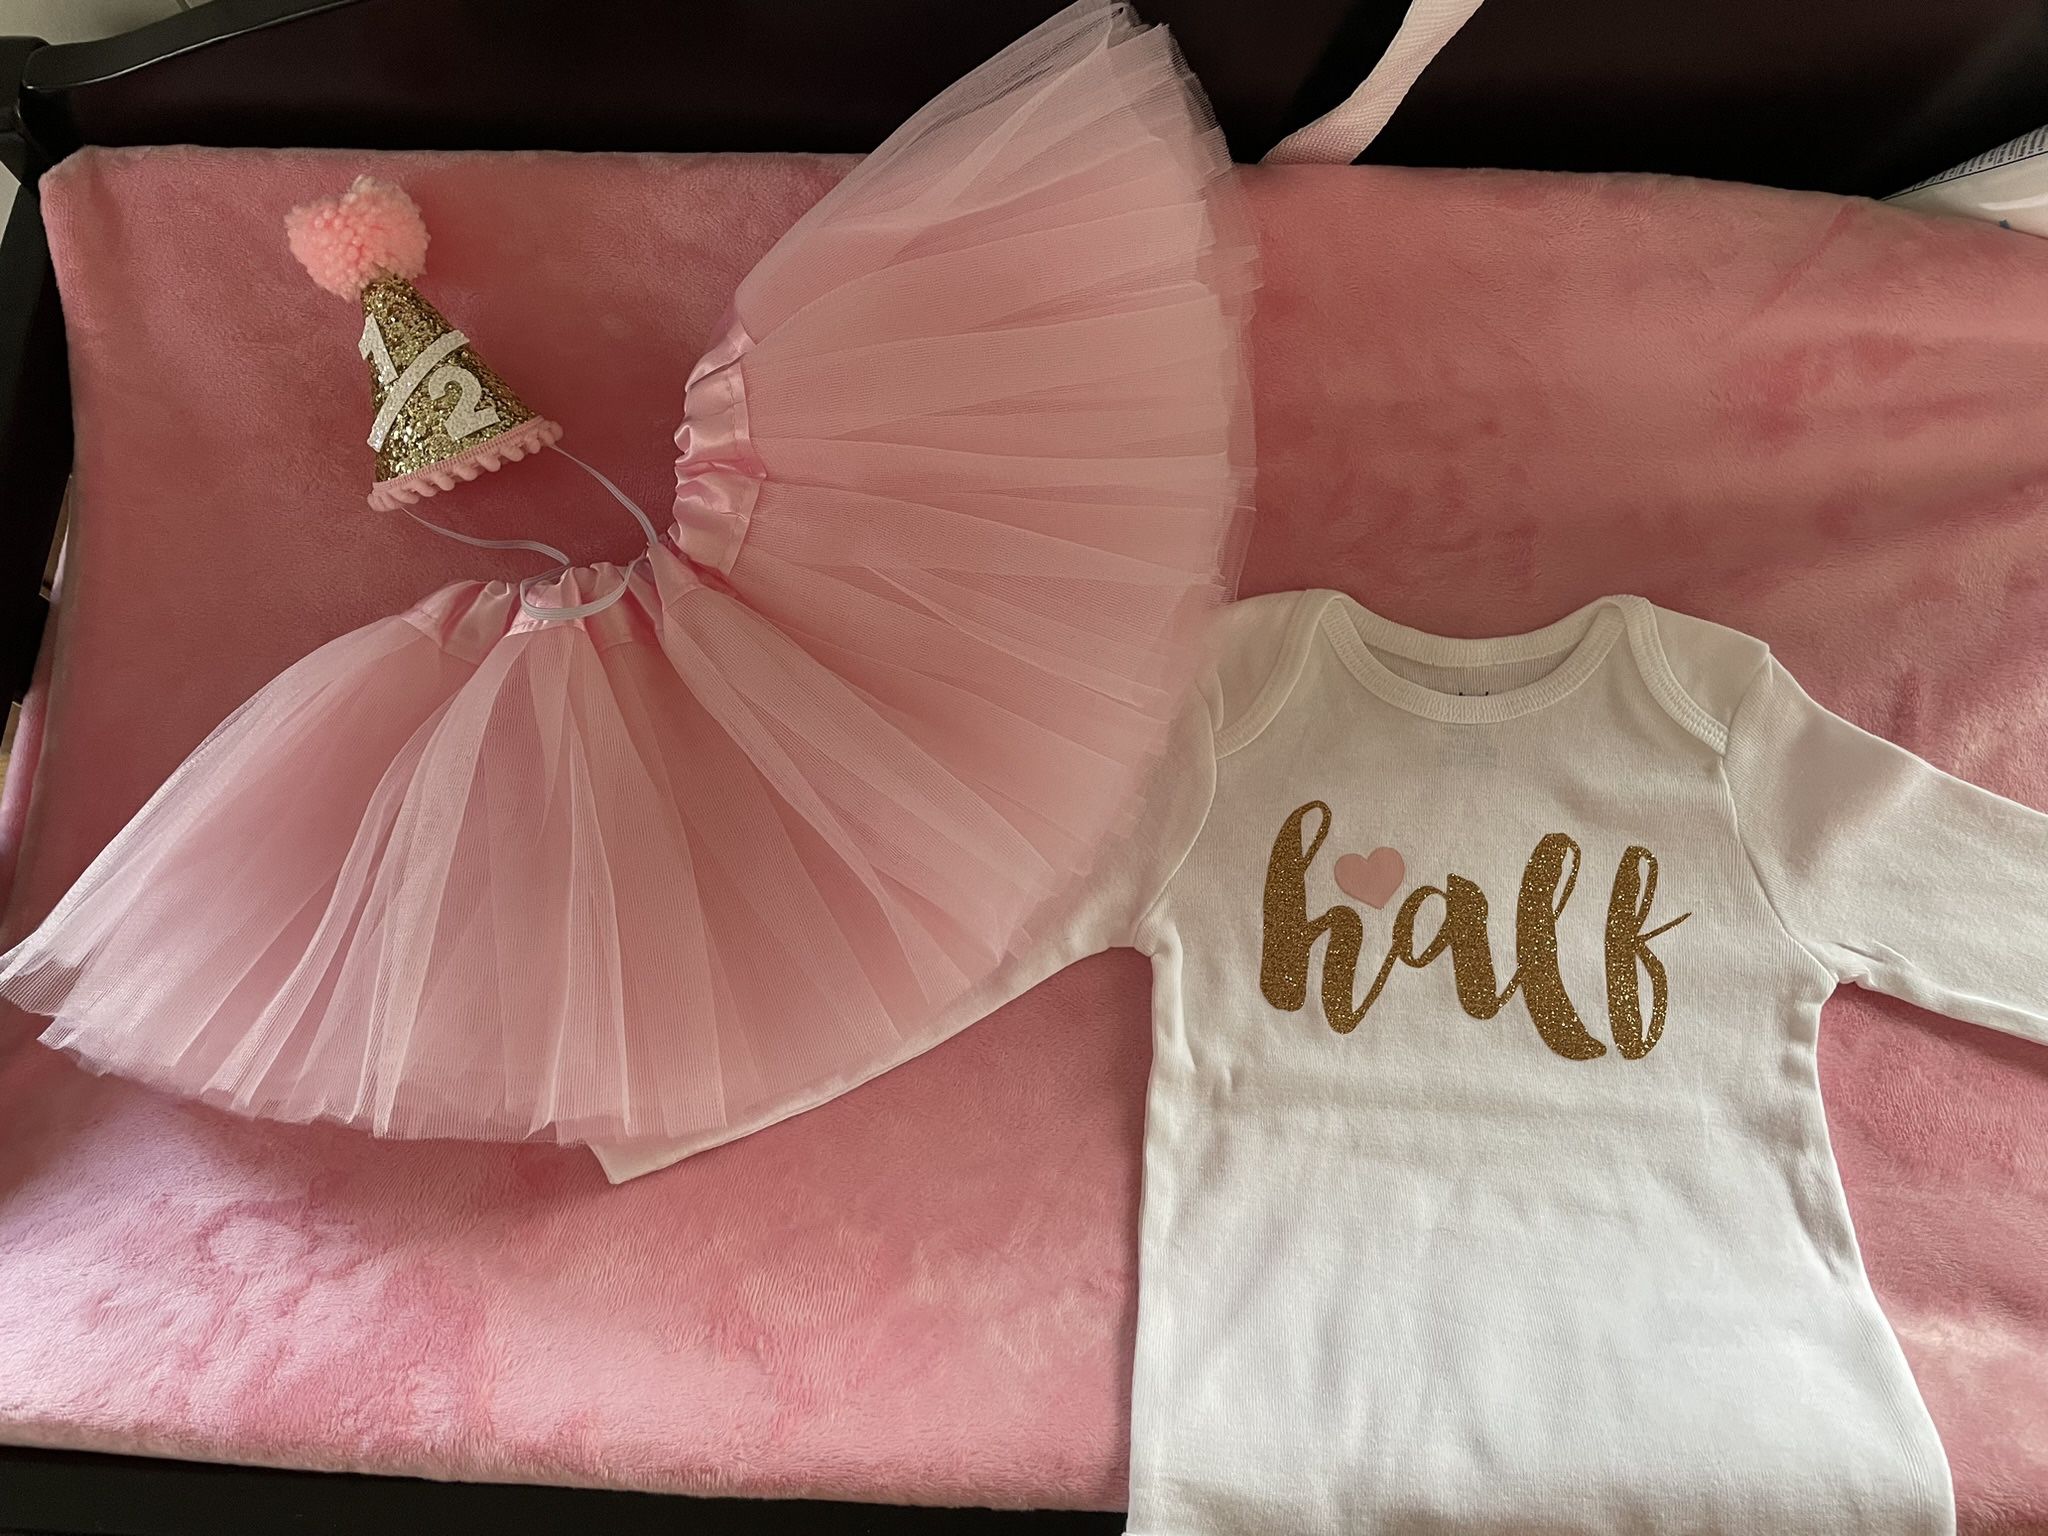 6-Month Baby Girl Photo Props